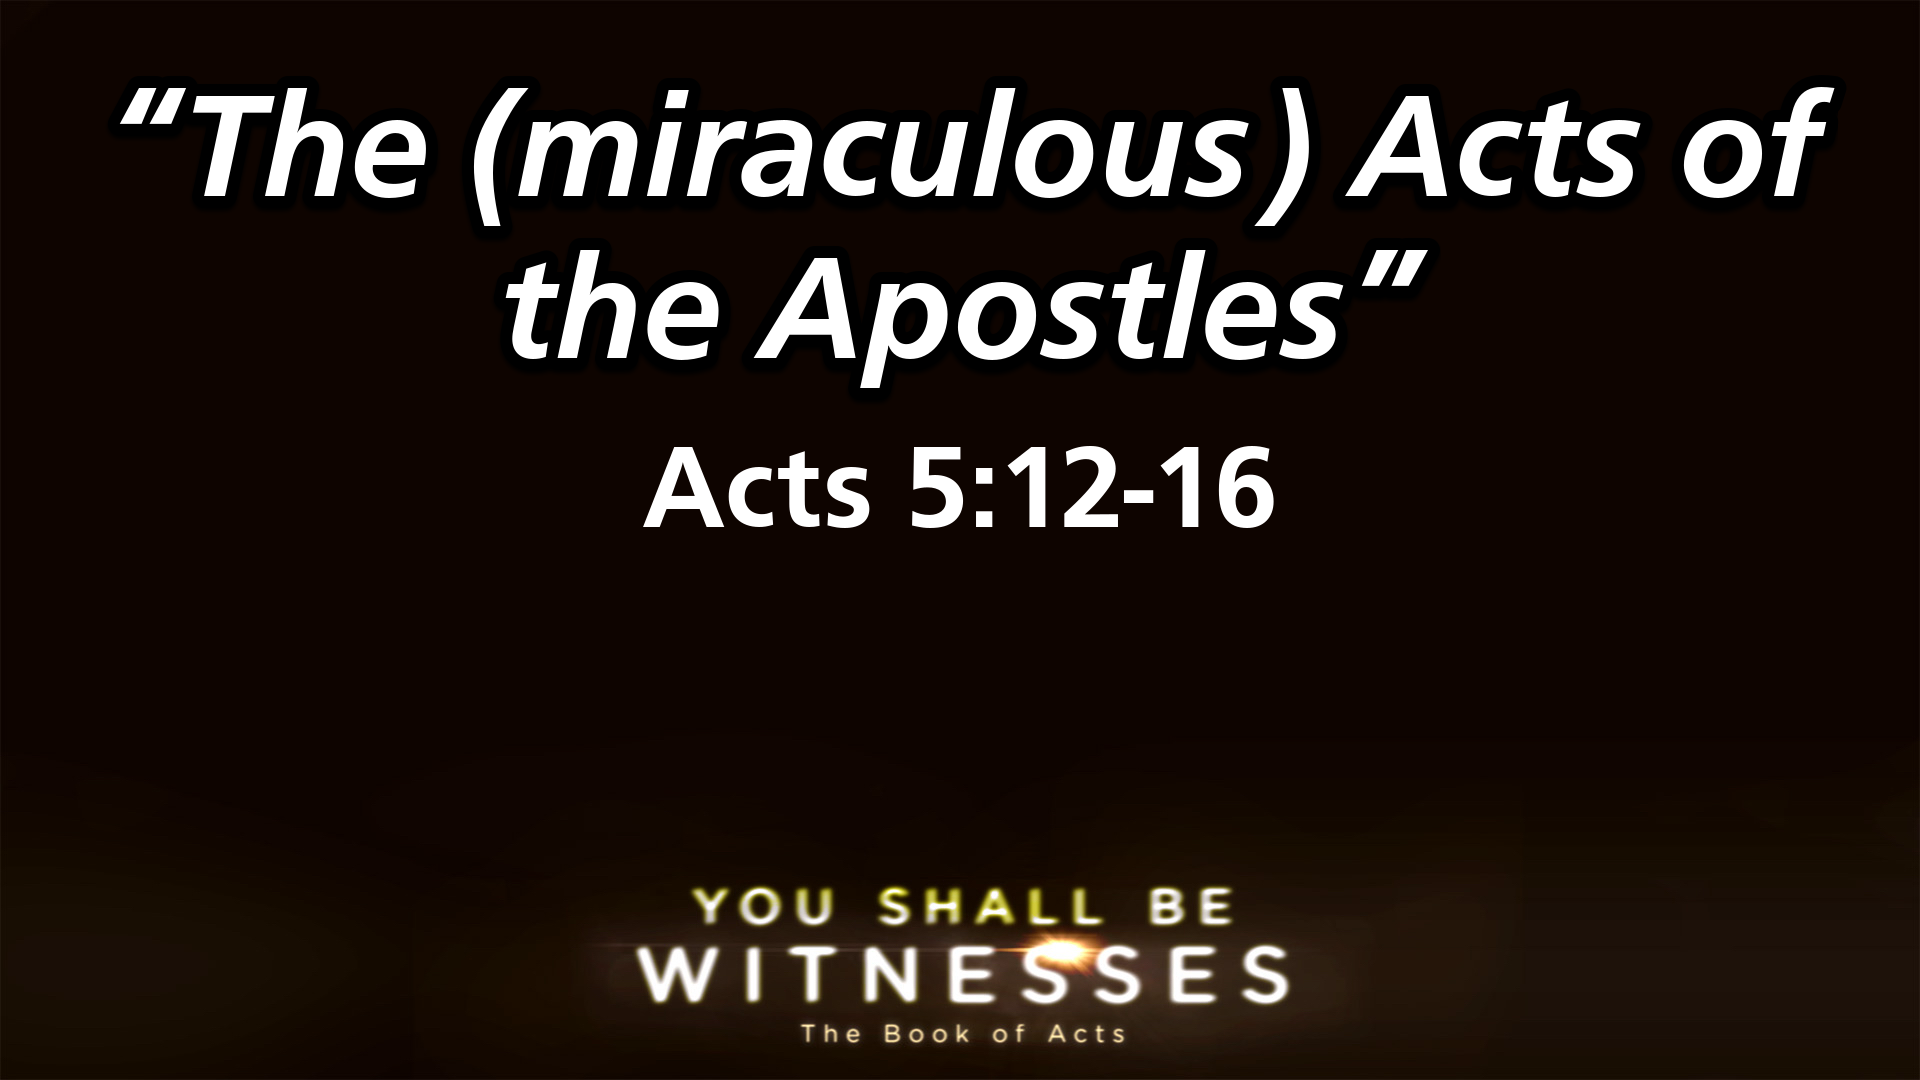 "The (miraculous) Acts of the Apostles"